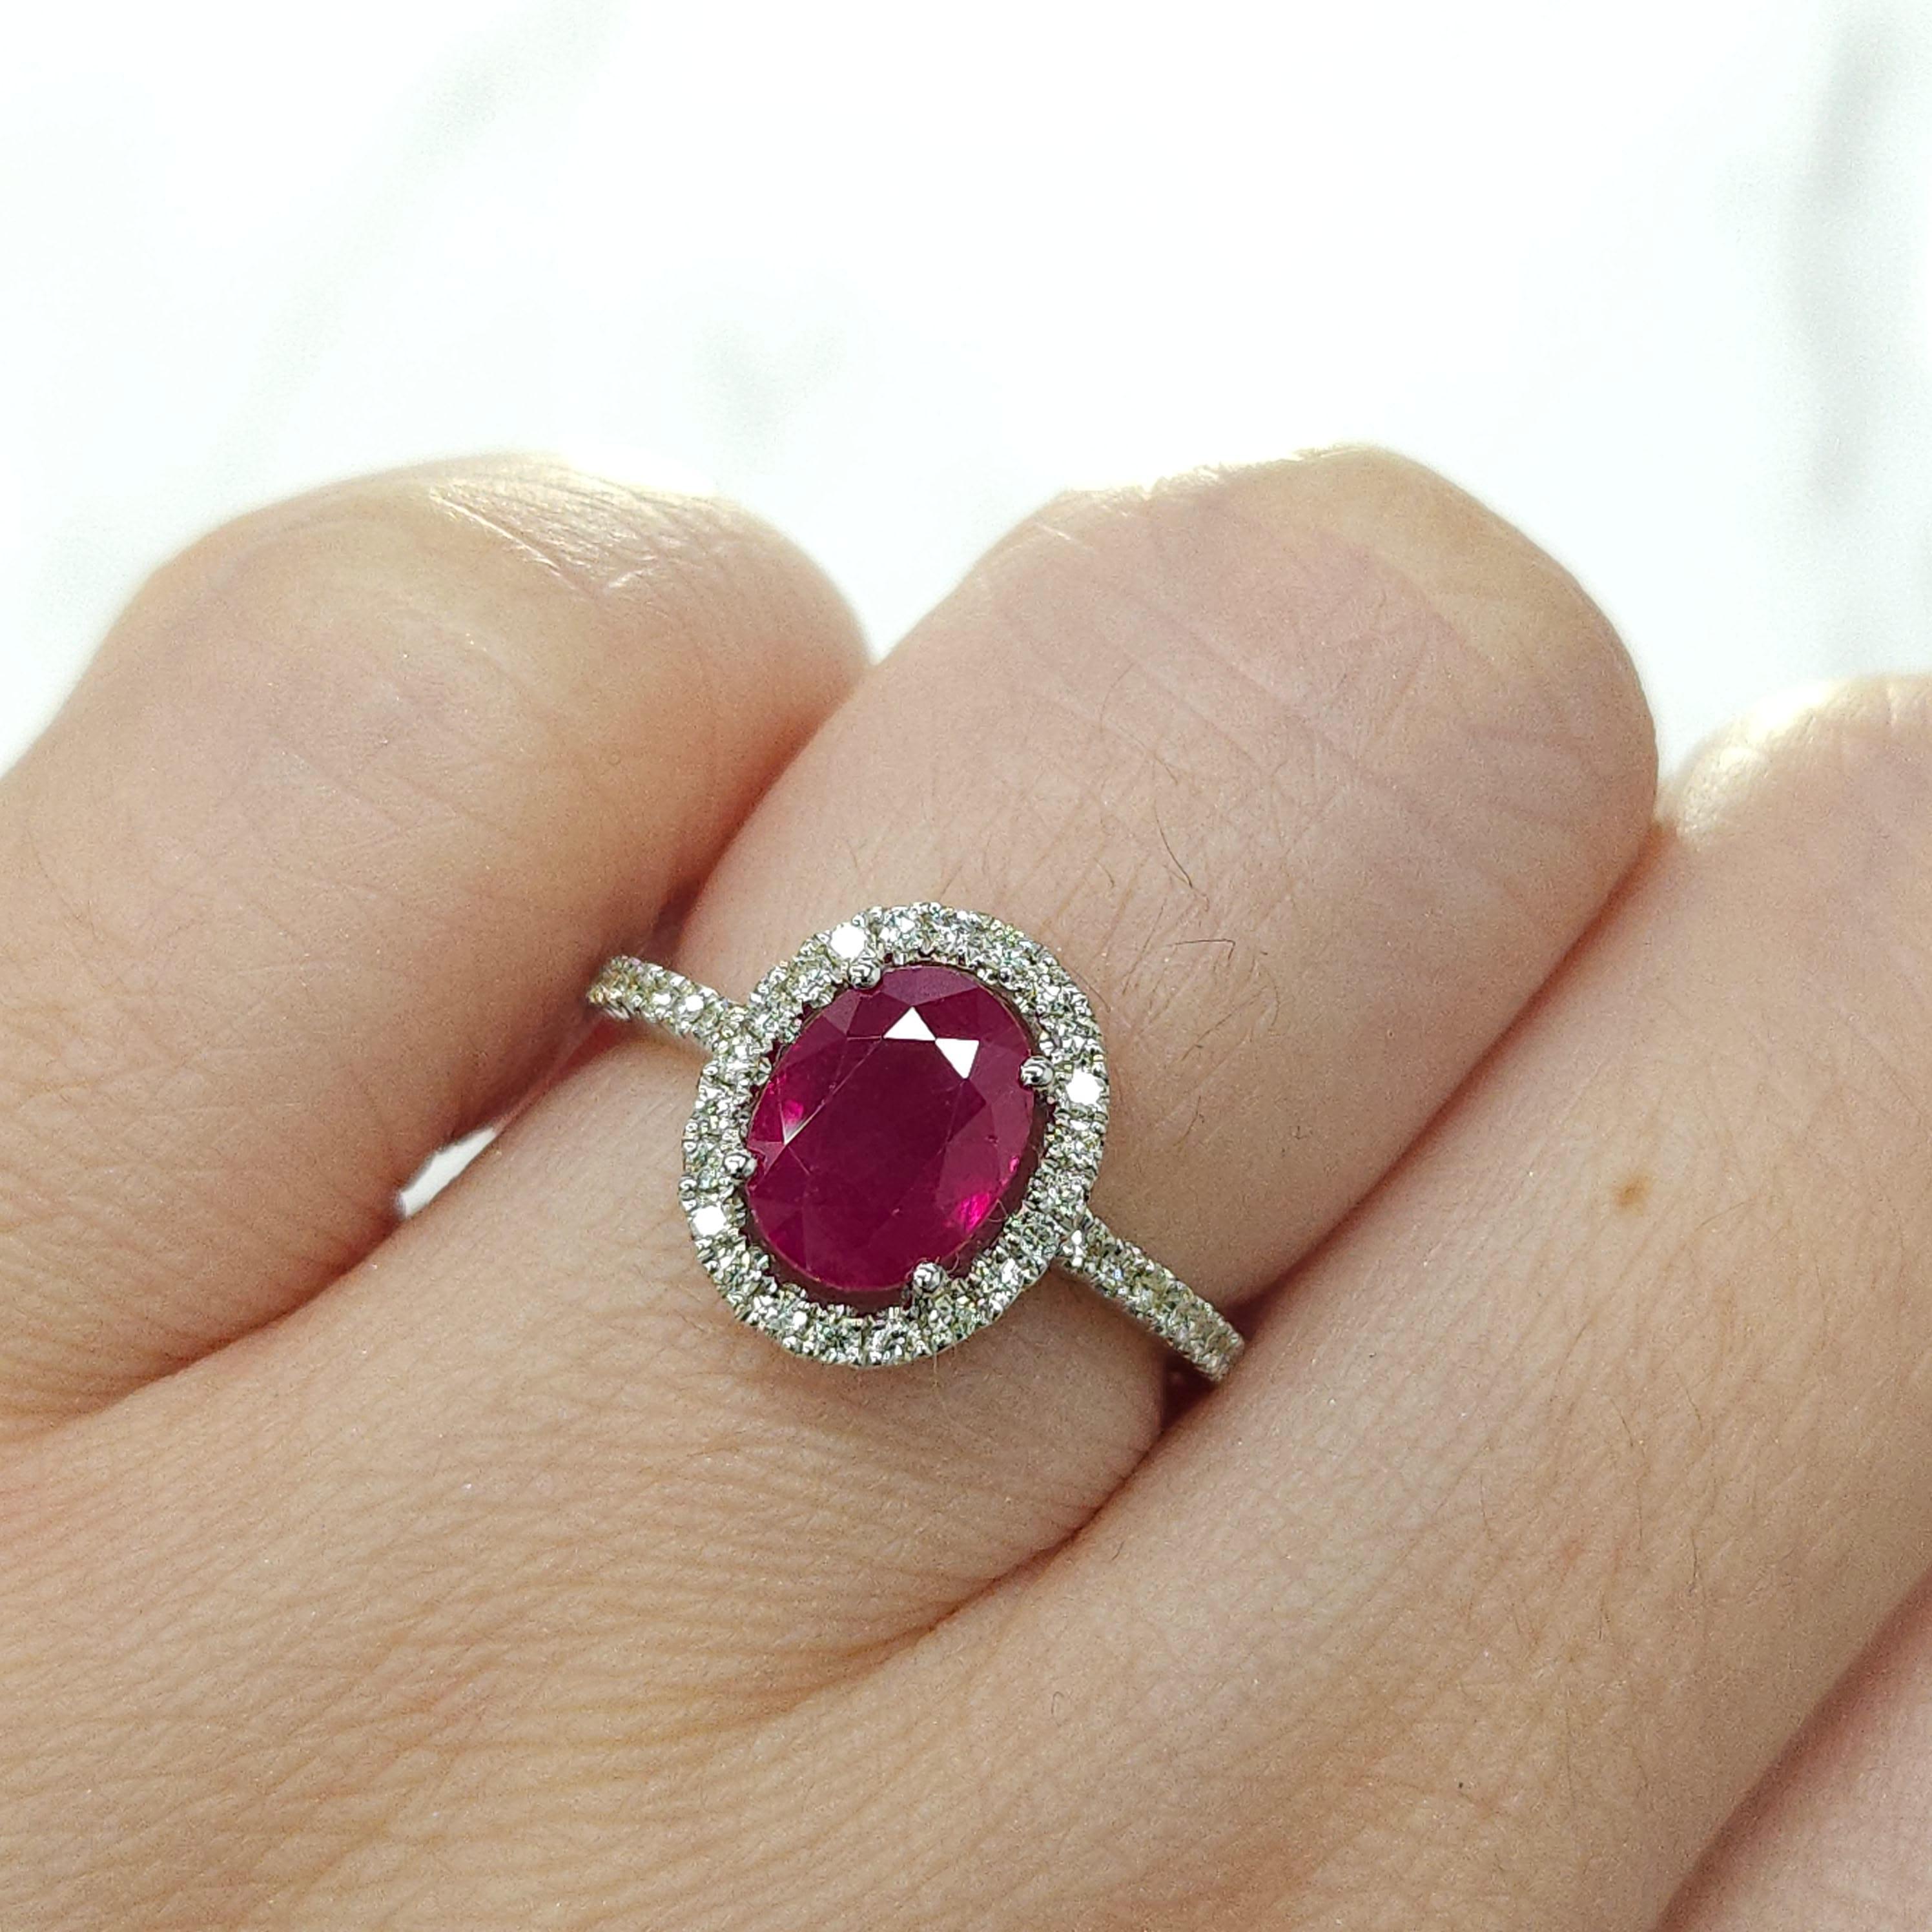 Embrace luxury and sophistication with this exquisite cocktail-style ring, featuring a mesmerizing IGI Certified 2.01 Carat Burma Ruby in a vivid purplish-red hue, elegantly shaped into an oval silhouette that radiates timeless elegance and allure.